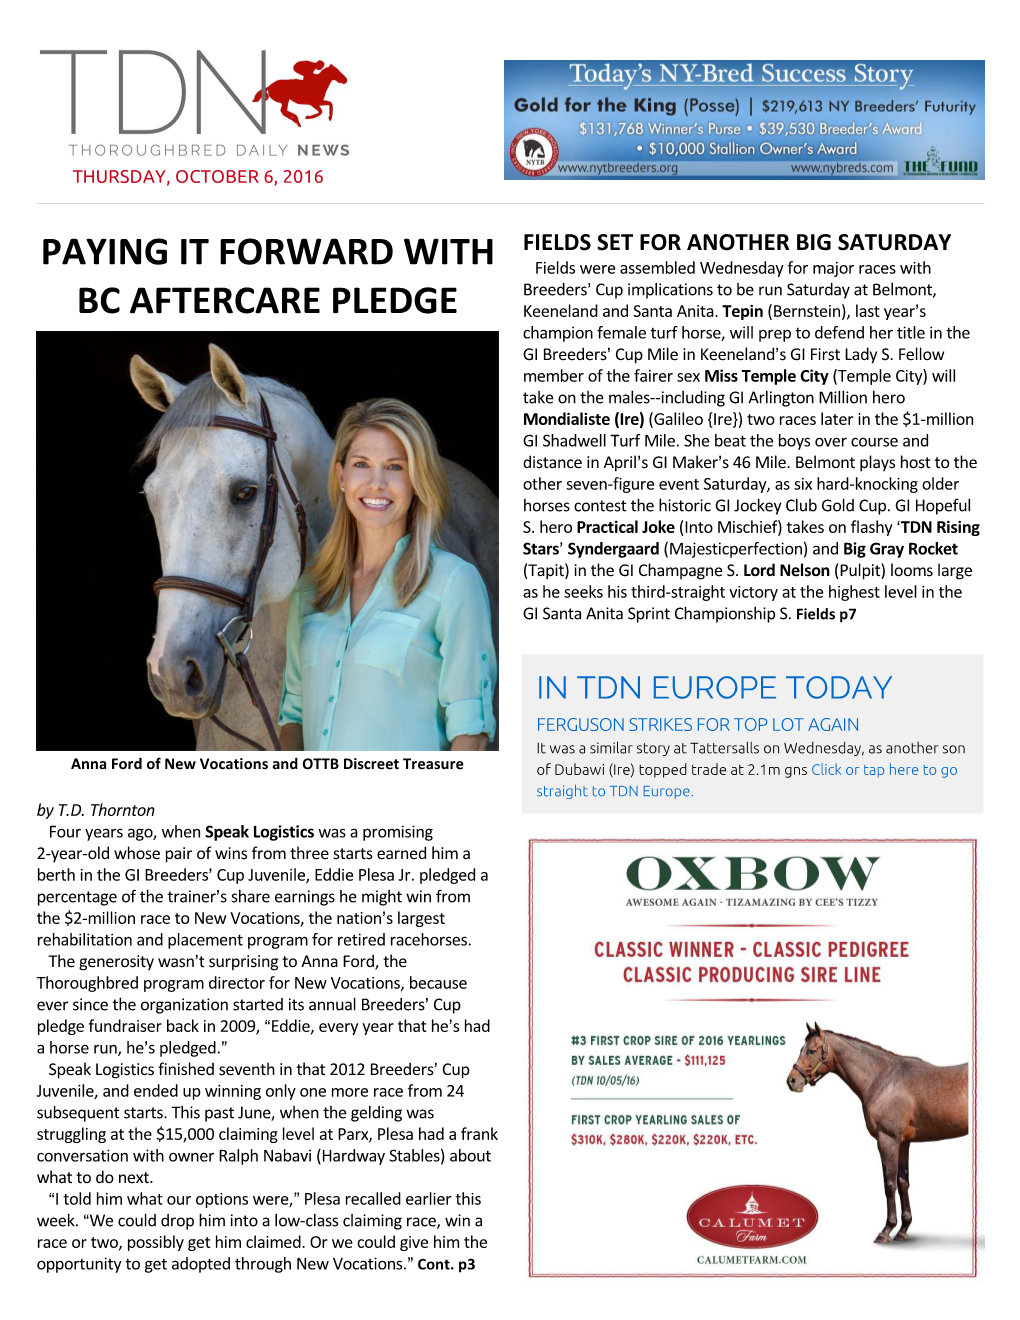 Paying It Forward with Bc Aftercare Pledge